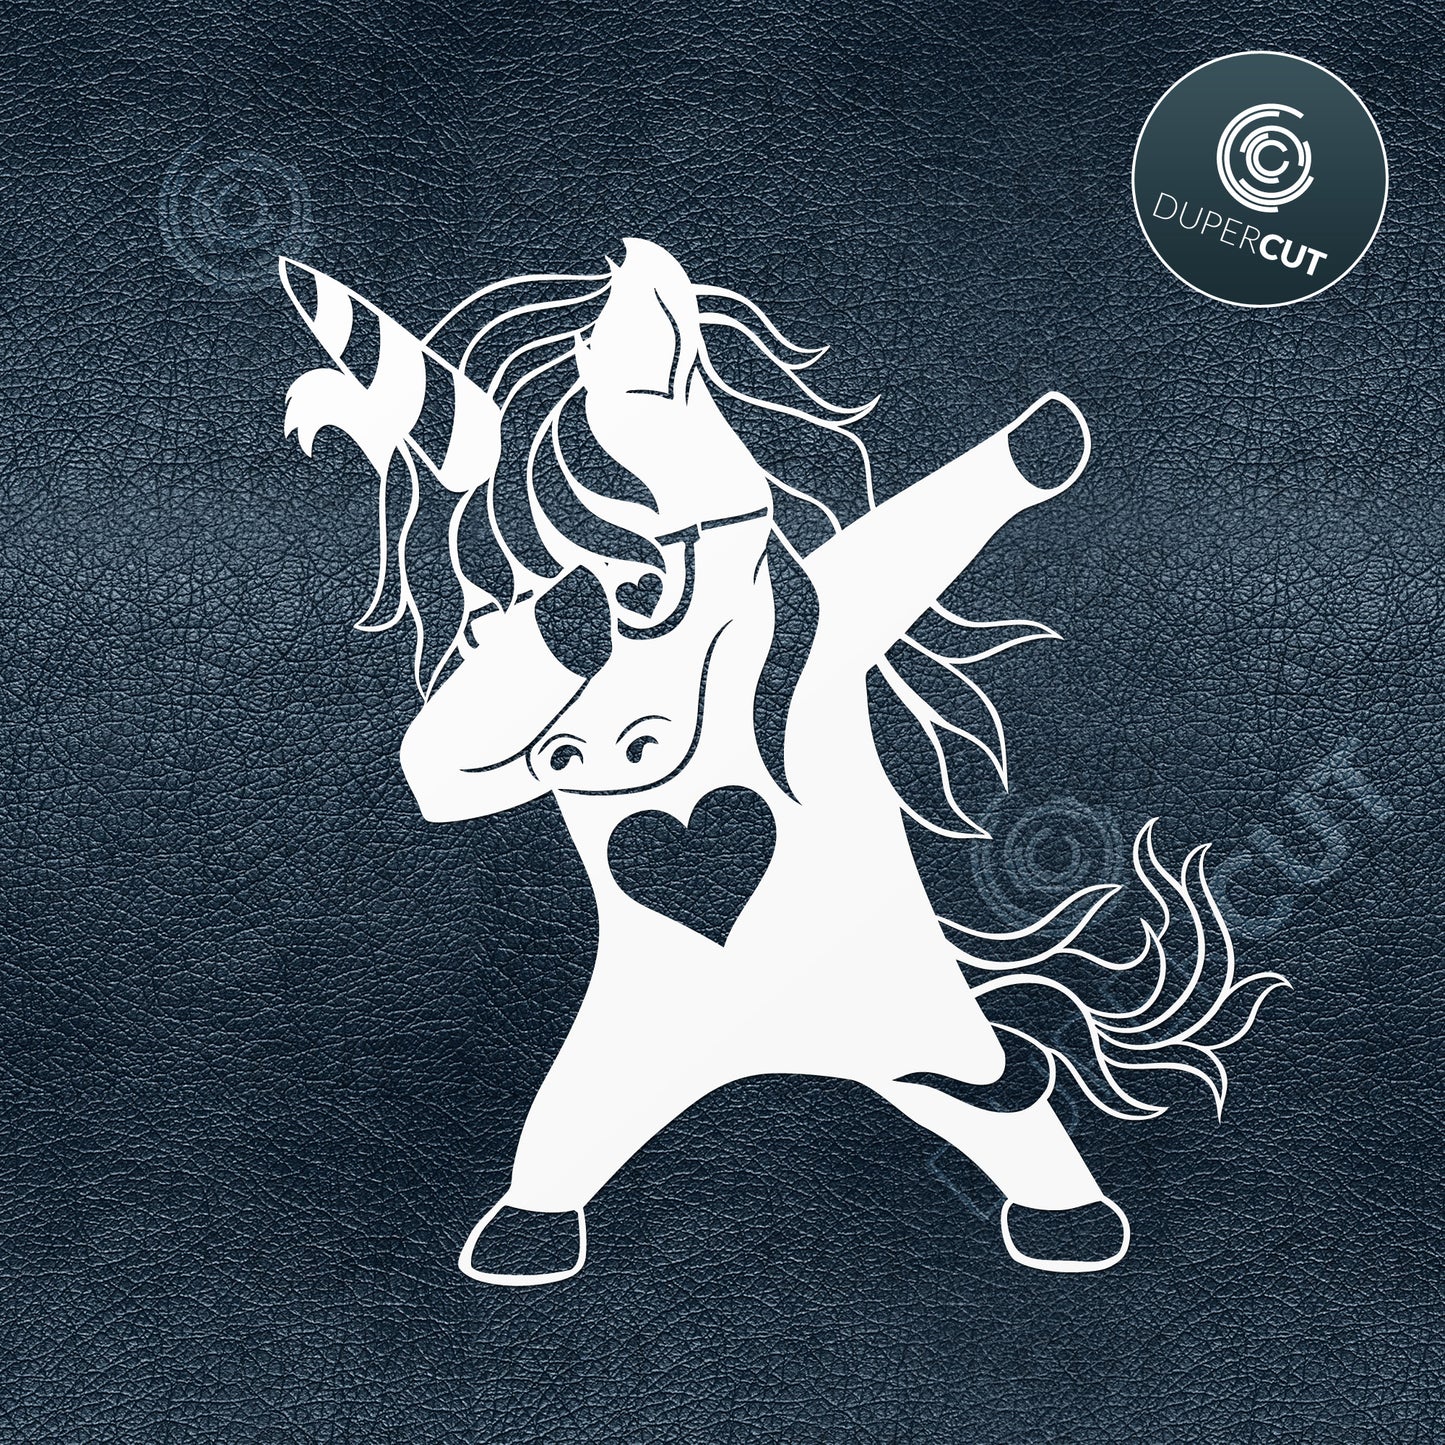 Dabbing unicorn with heart - SVG DXF laser cutting engraving vector files by DuperCut.com